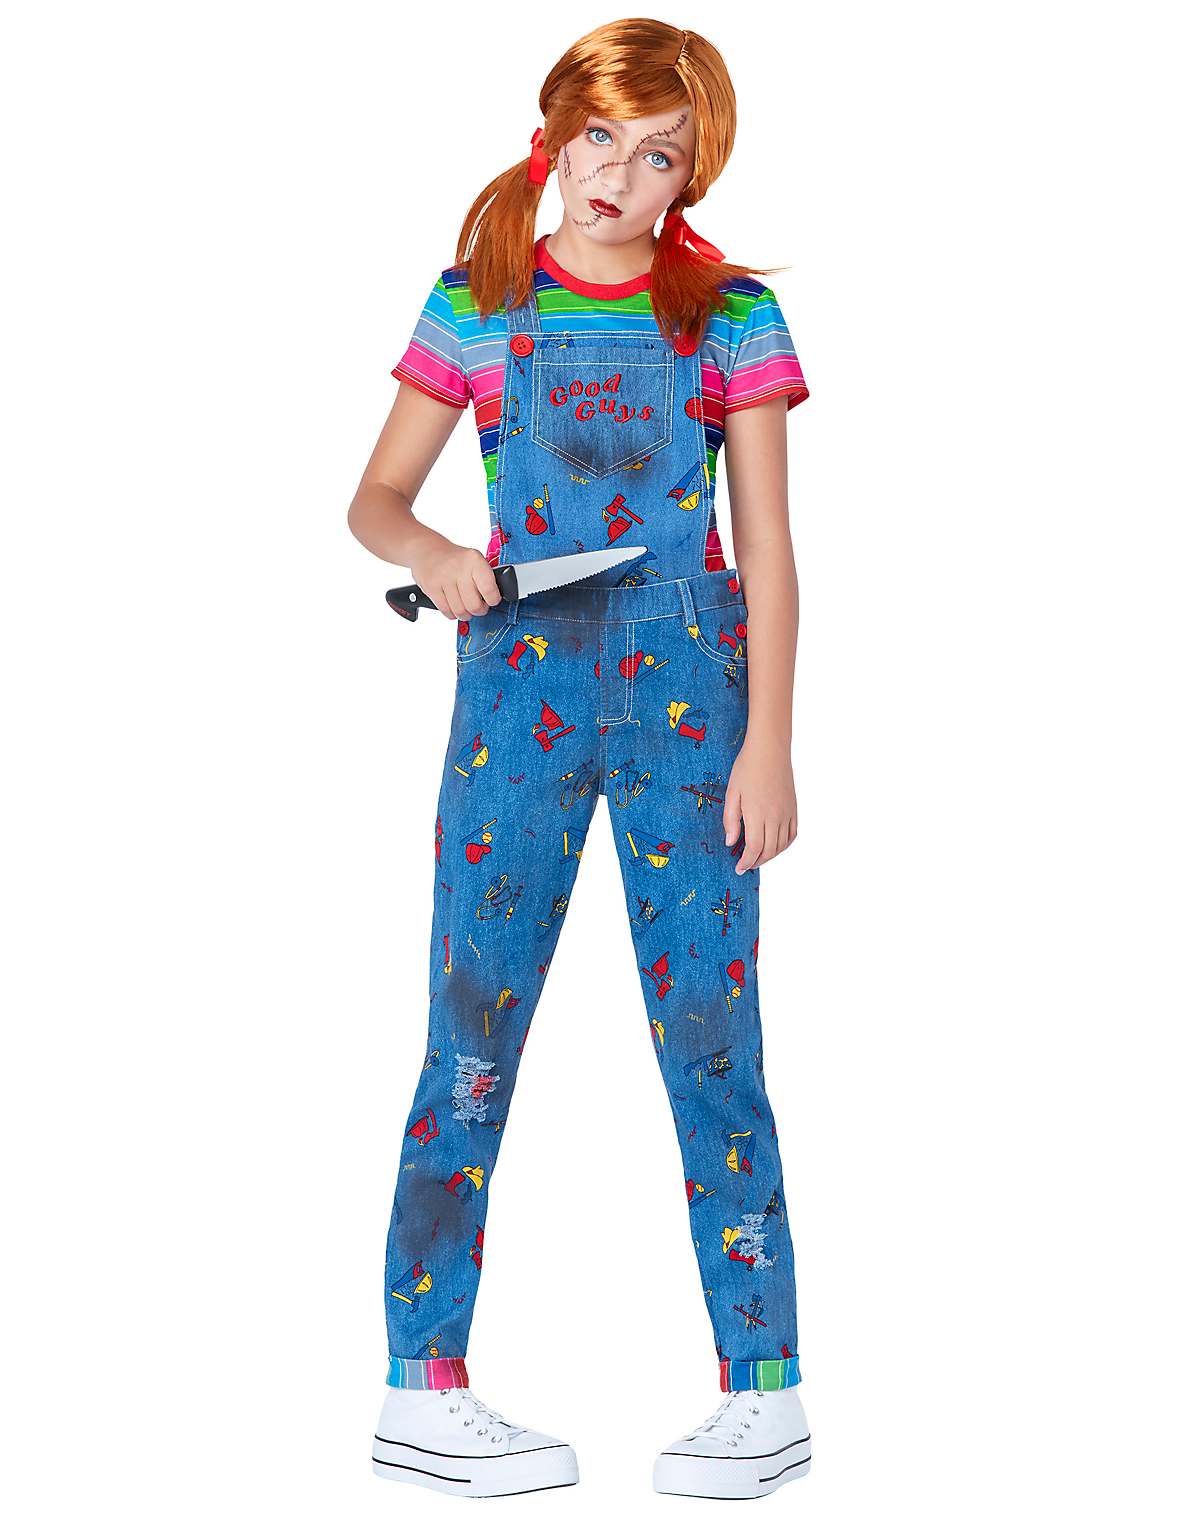 Kids Chucky Overalls Costume - The Signature Collection